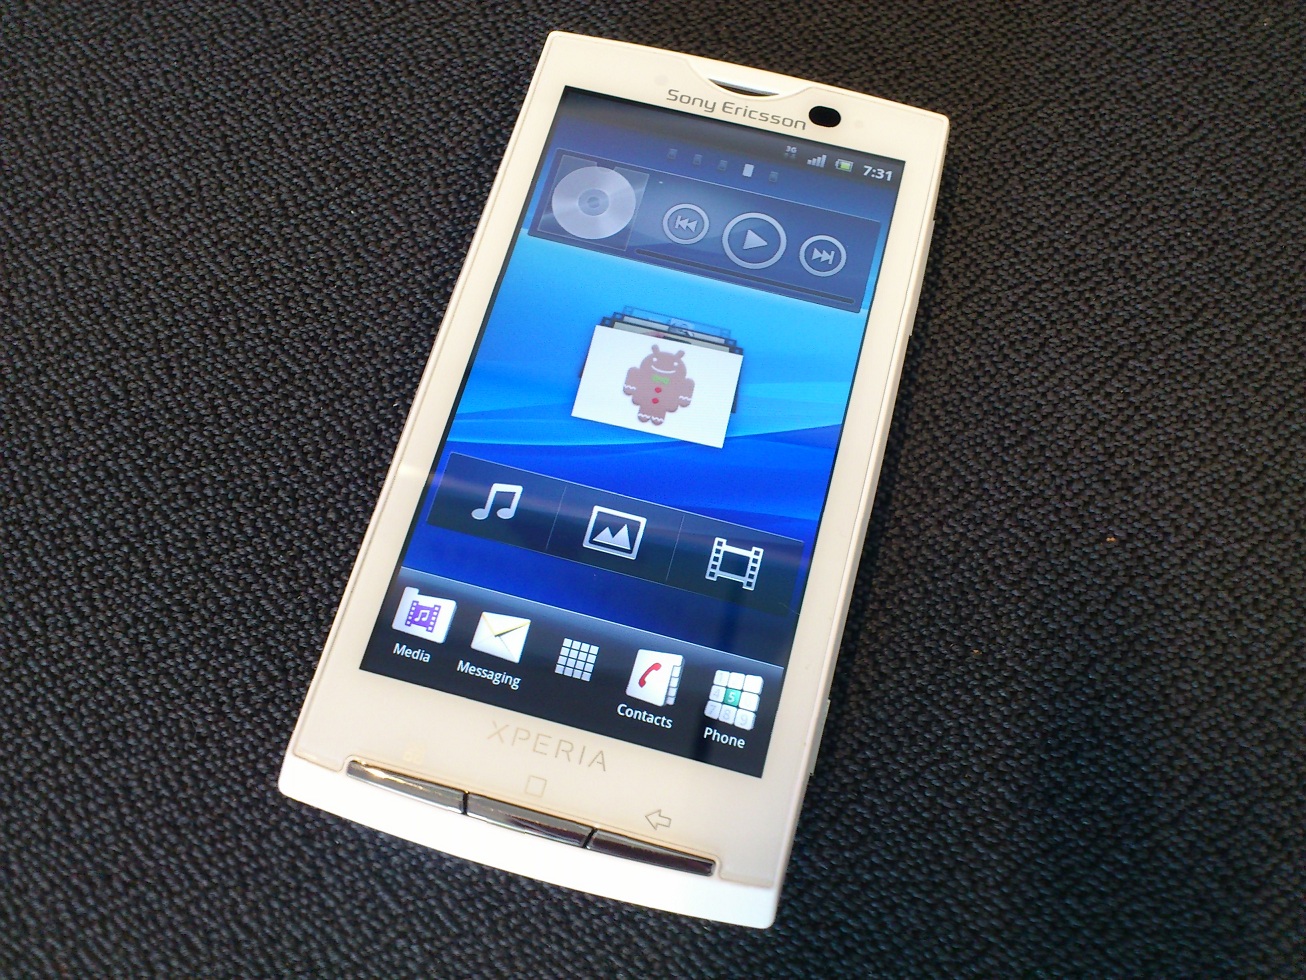 XPERIA X10 to get Android 2.3 this summer!